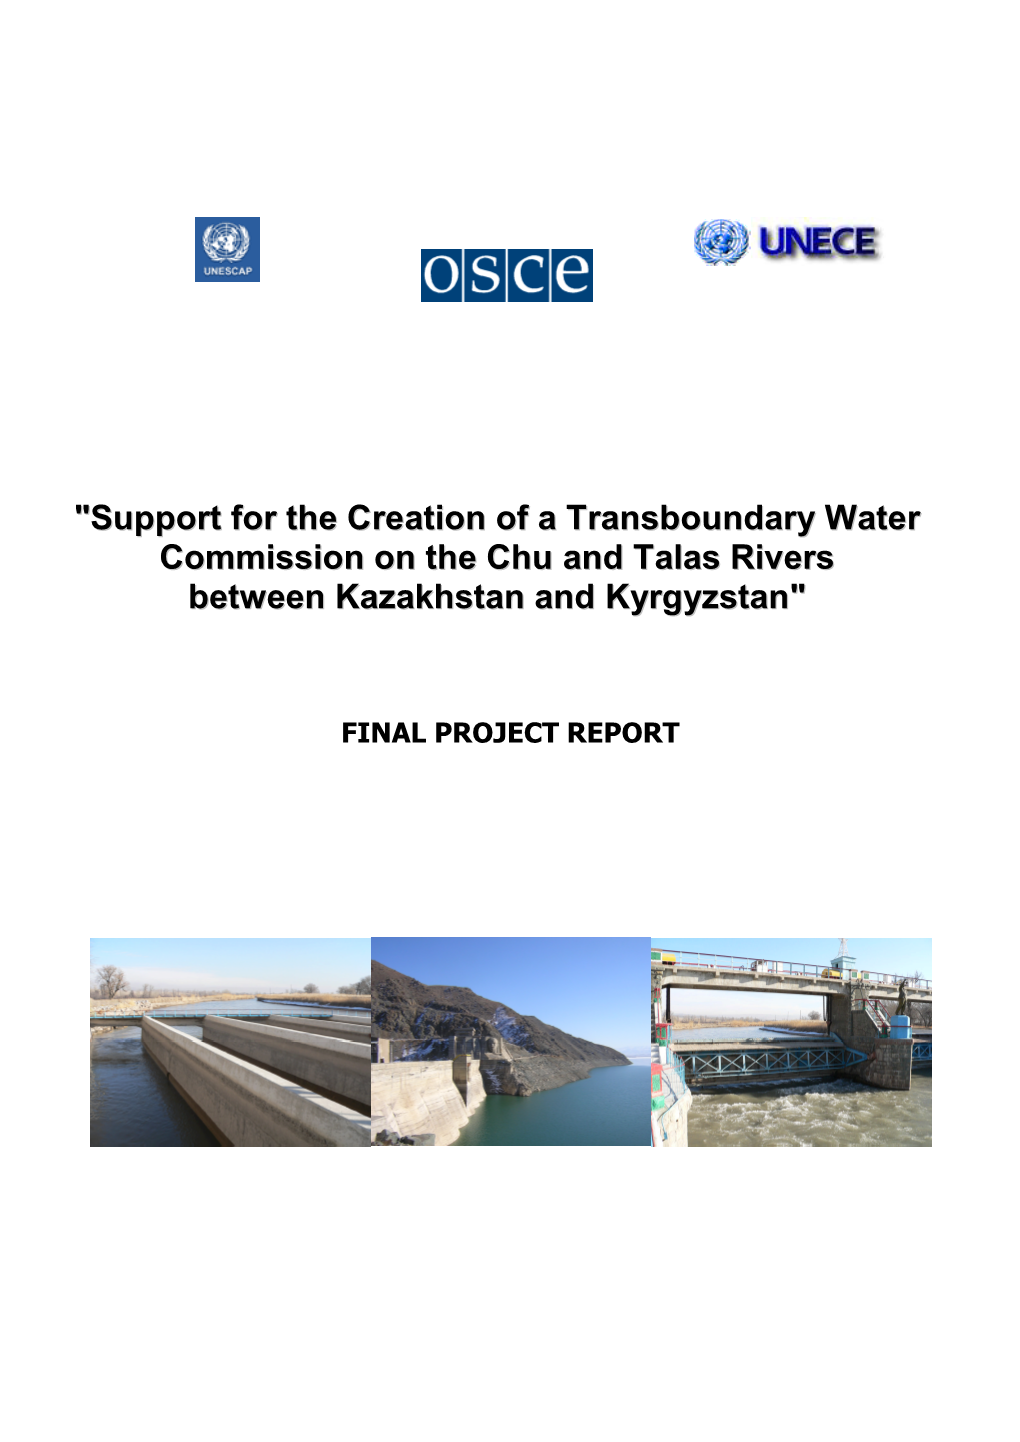 Support for the Creation of a Transboundary Water Commission on the Chu and Talas Rivers Between Kazakhstan and Kyrgyzstan"